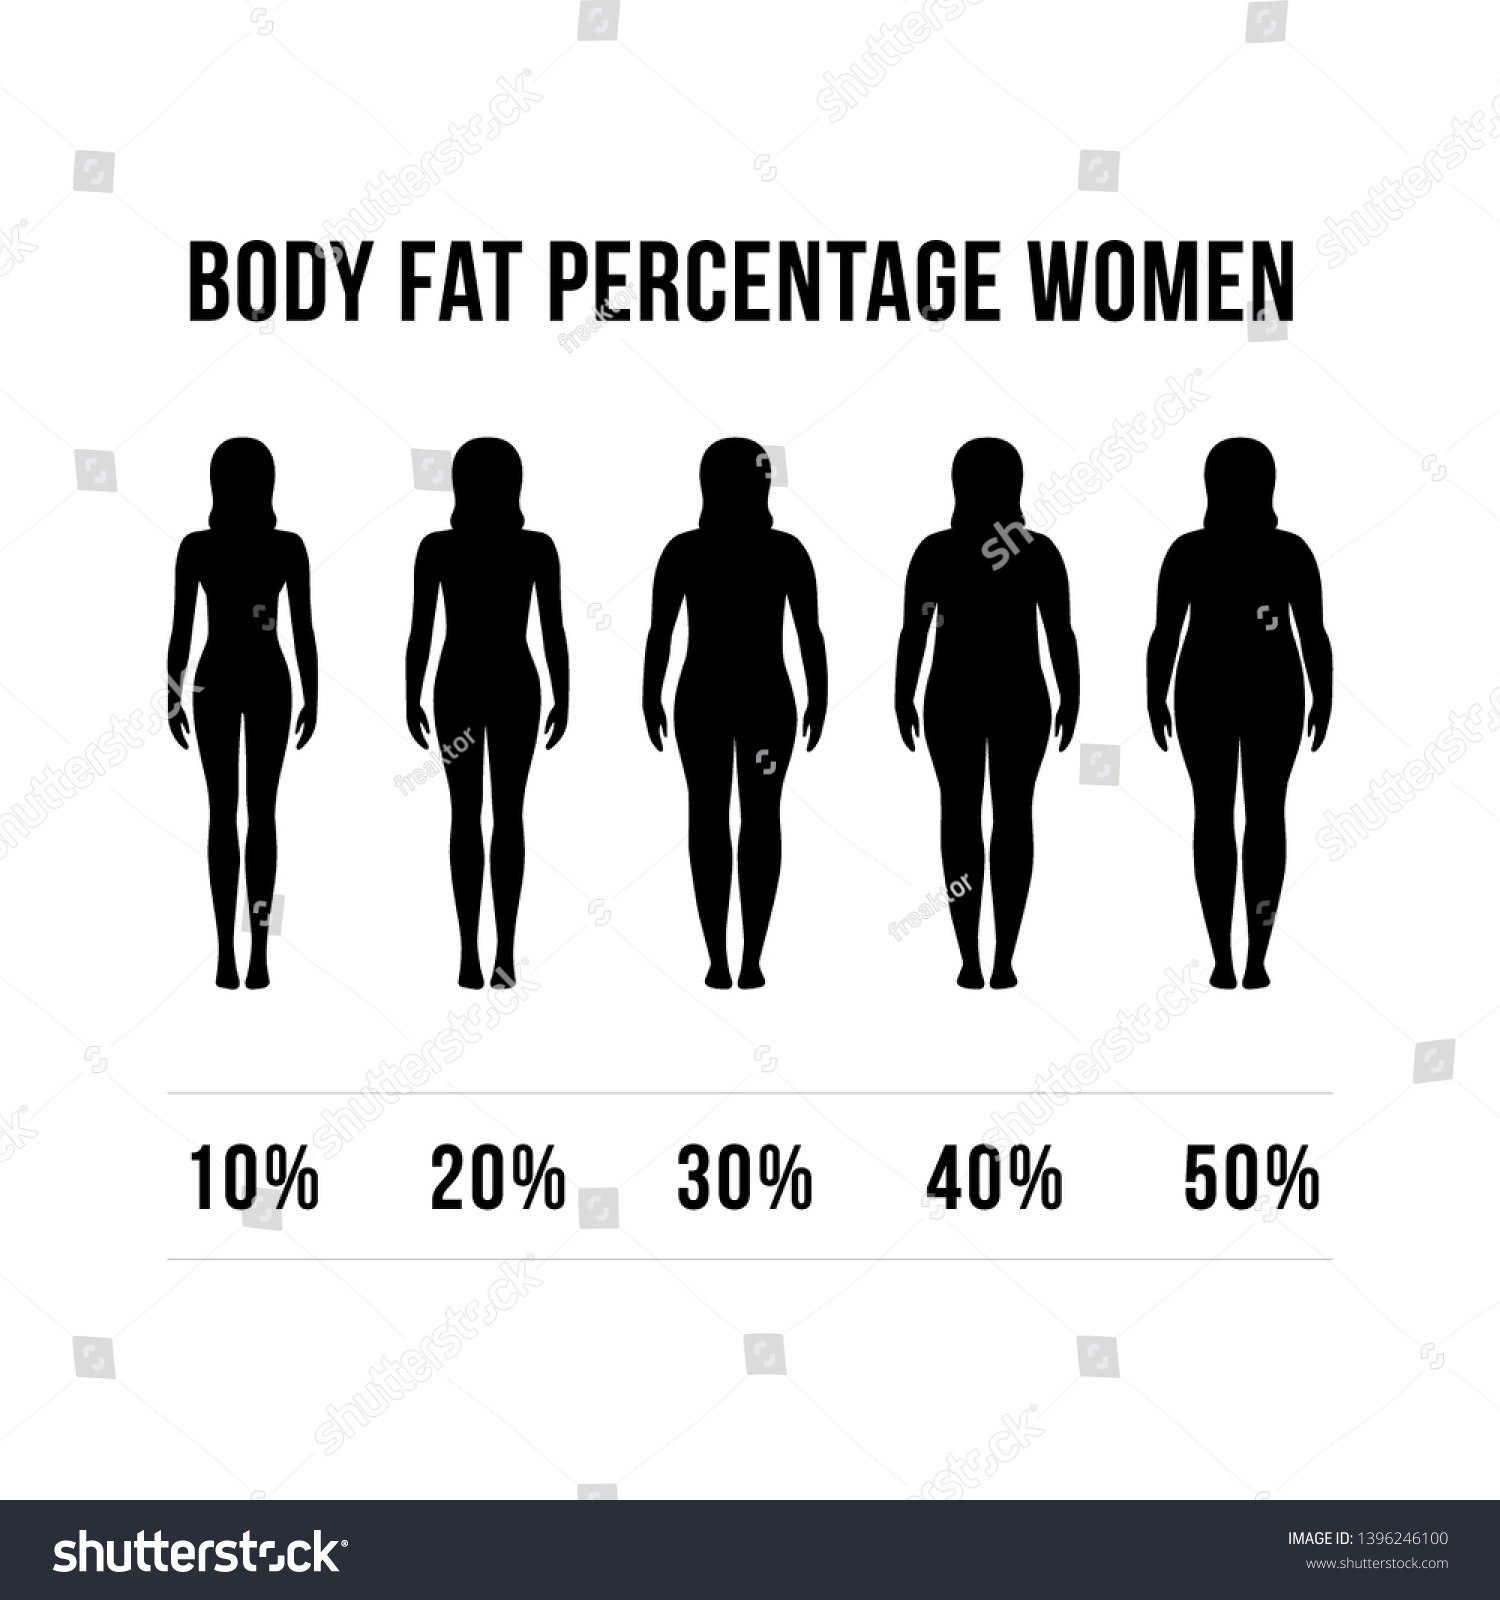 SVG of body fat percentage human designs concept vector.
diets and exercises before and after from fat to fitness. svg